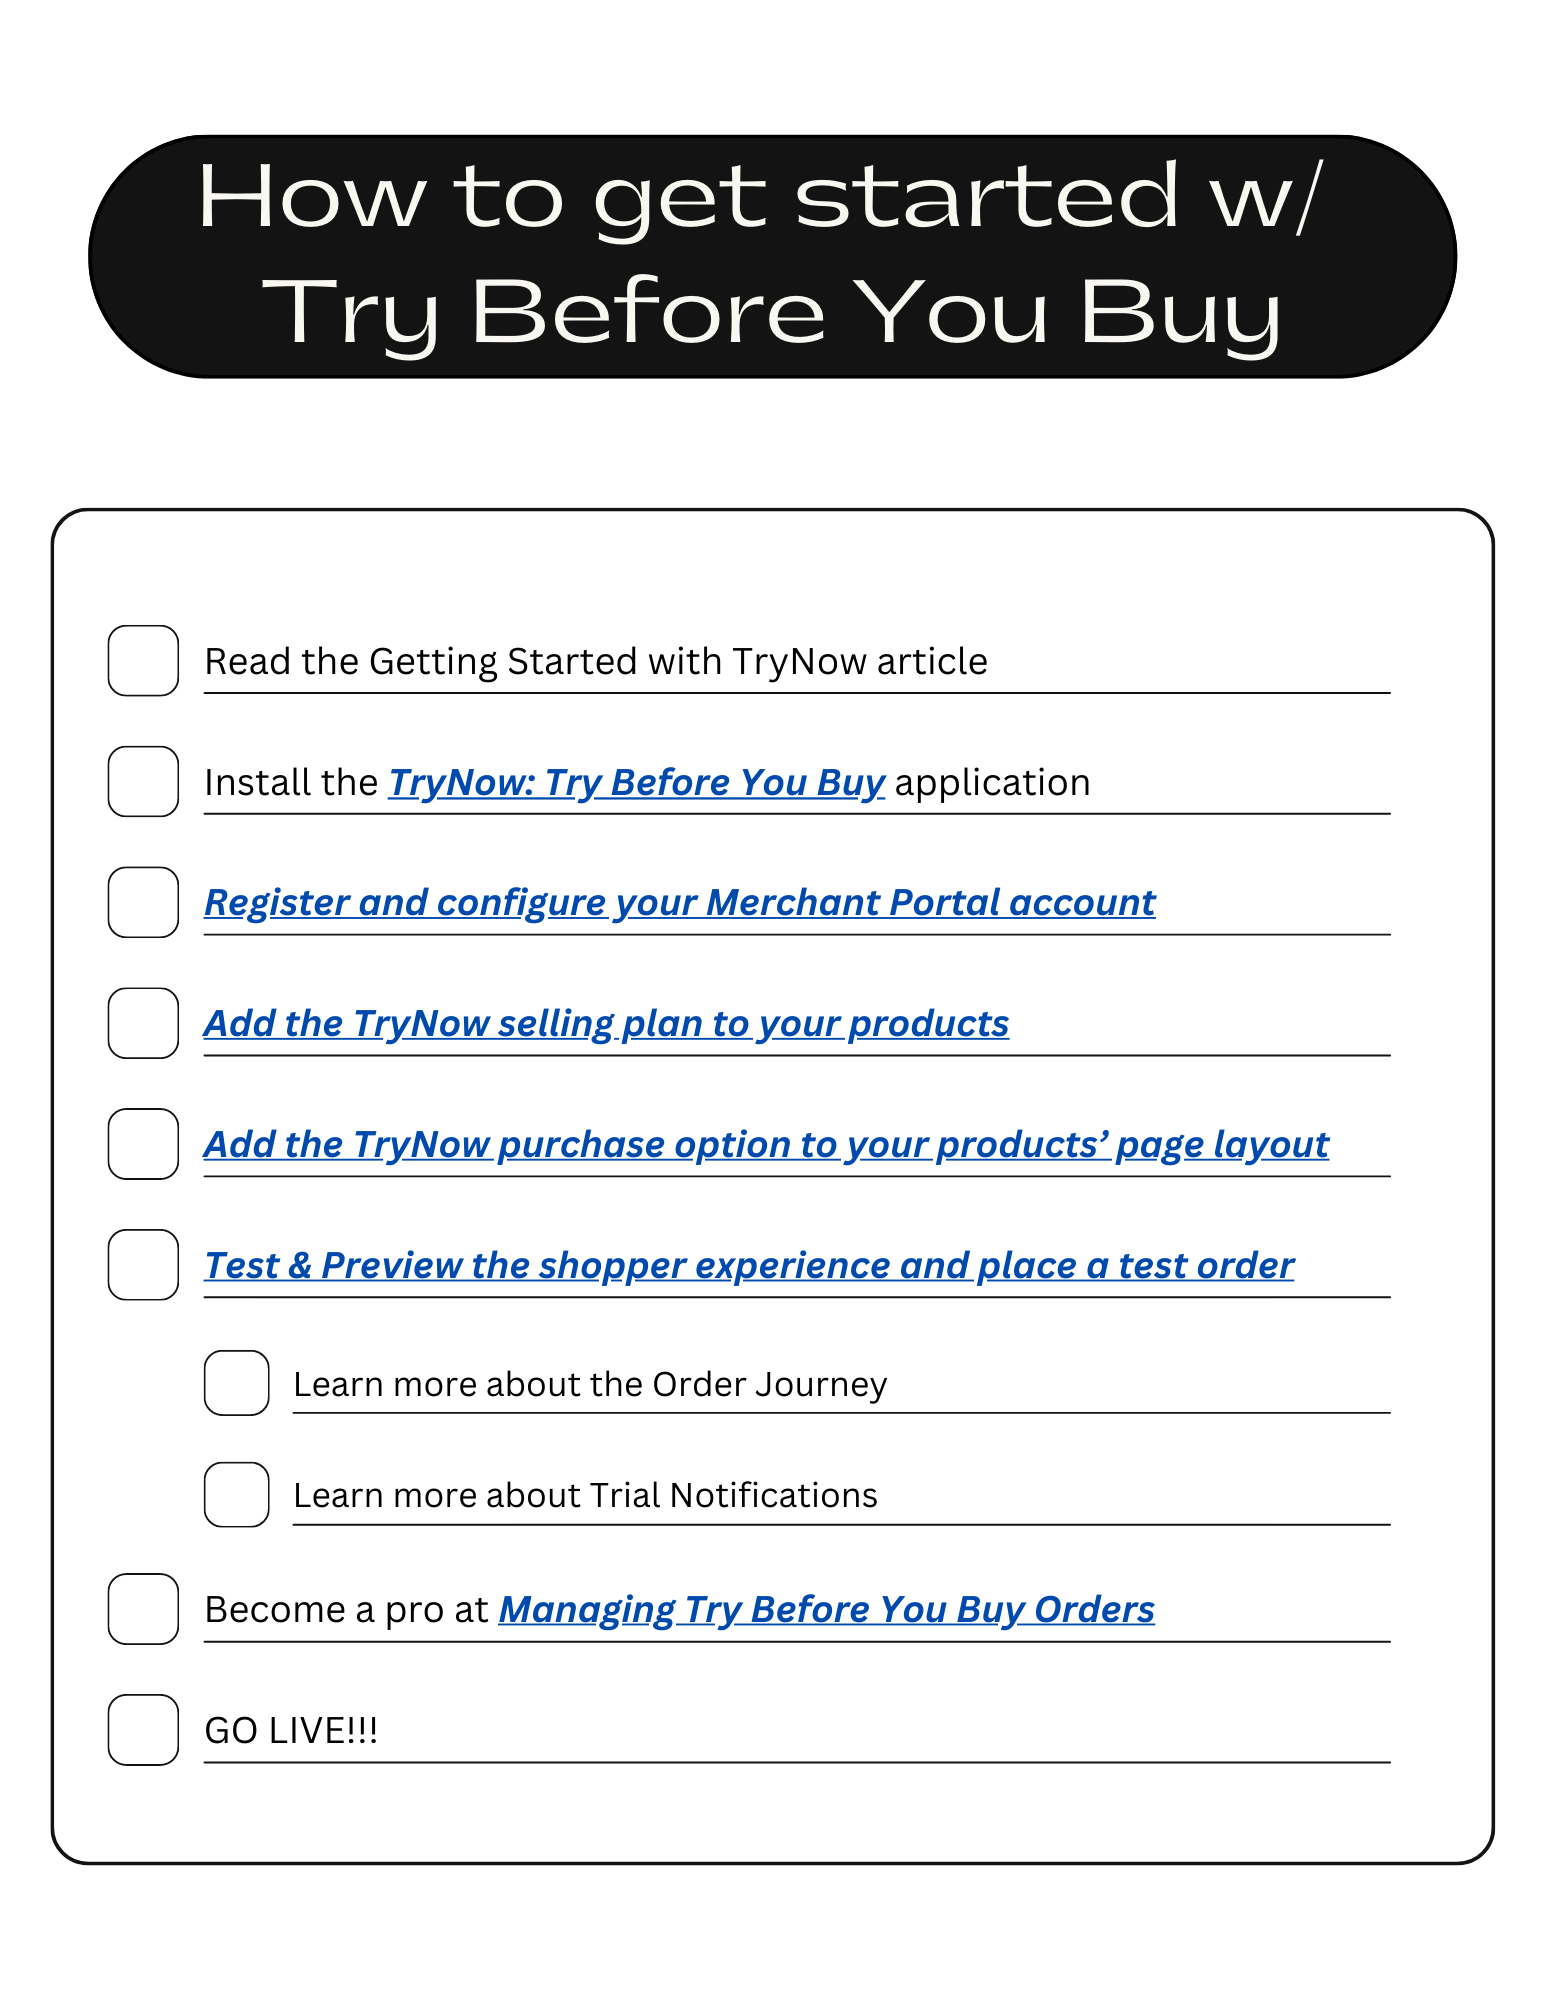 TBYB_App_Getting_Started_Checklist.png